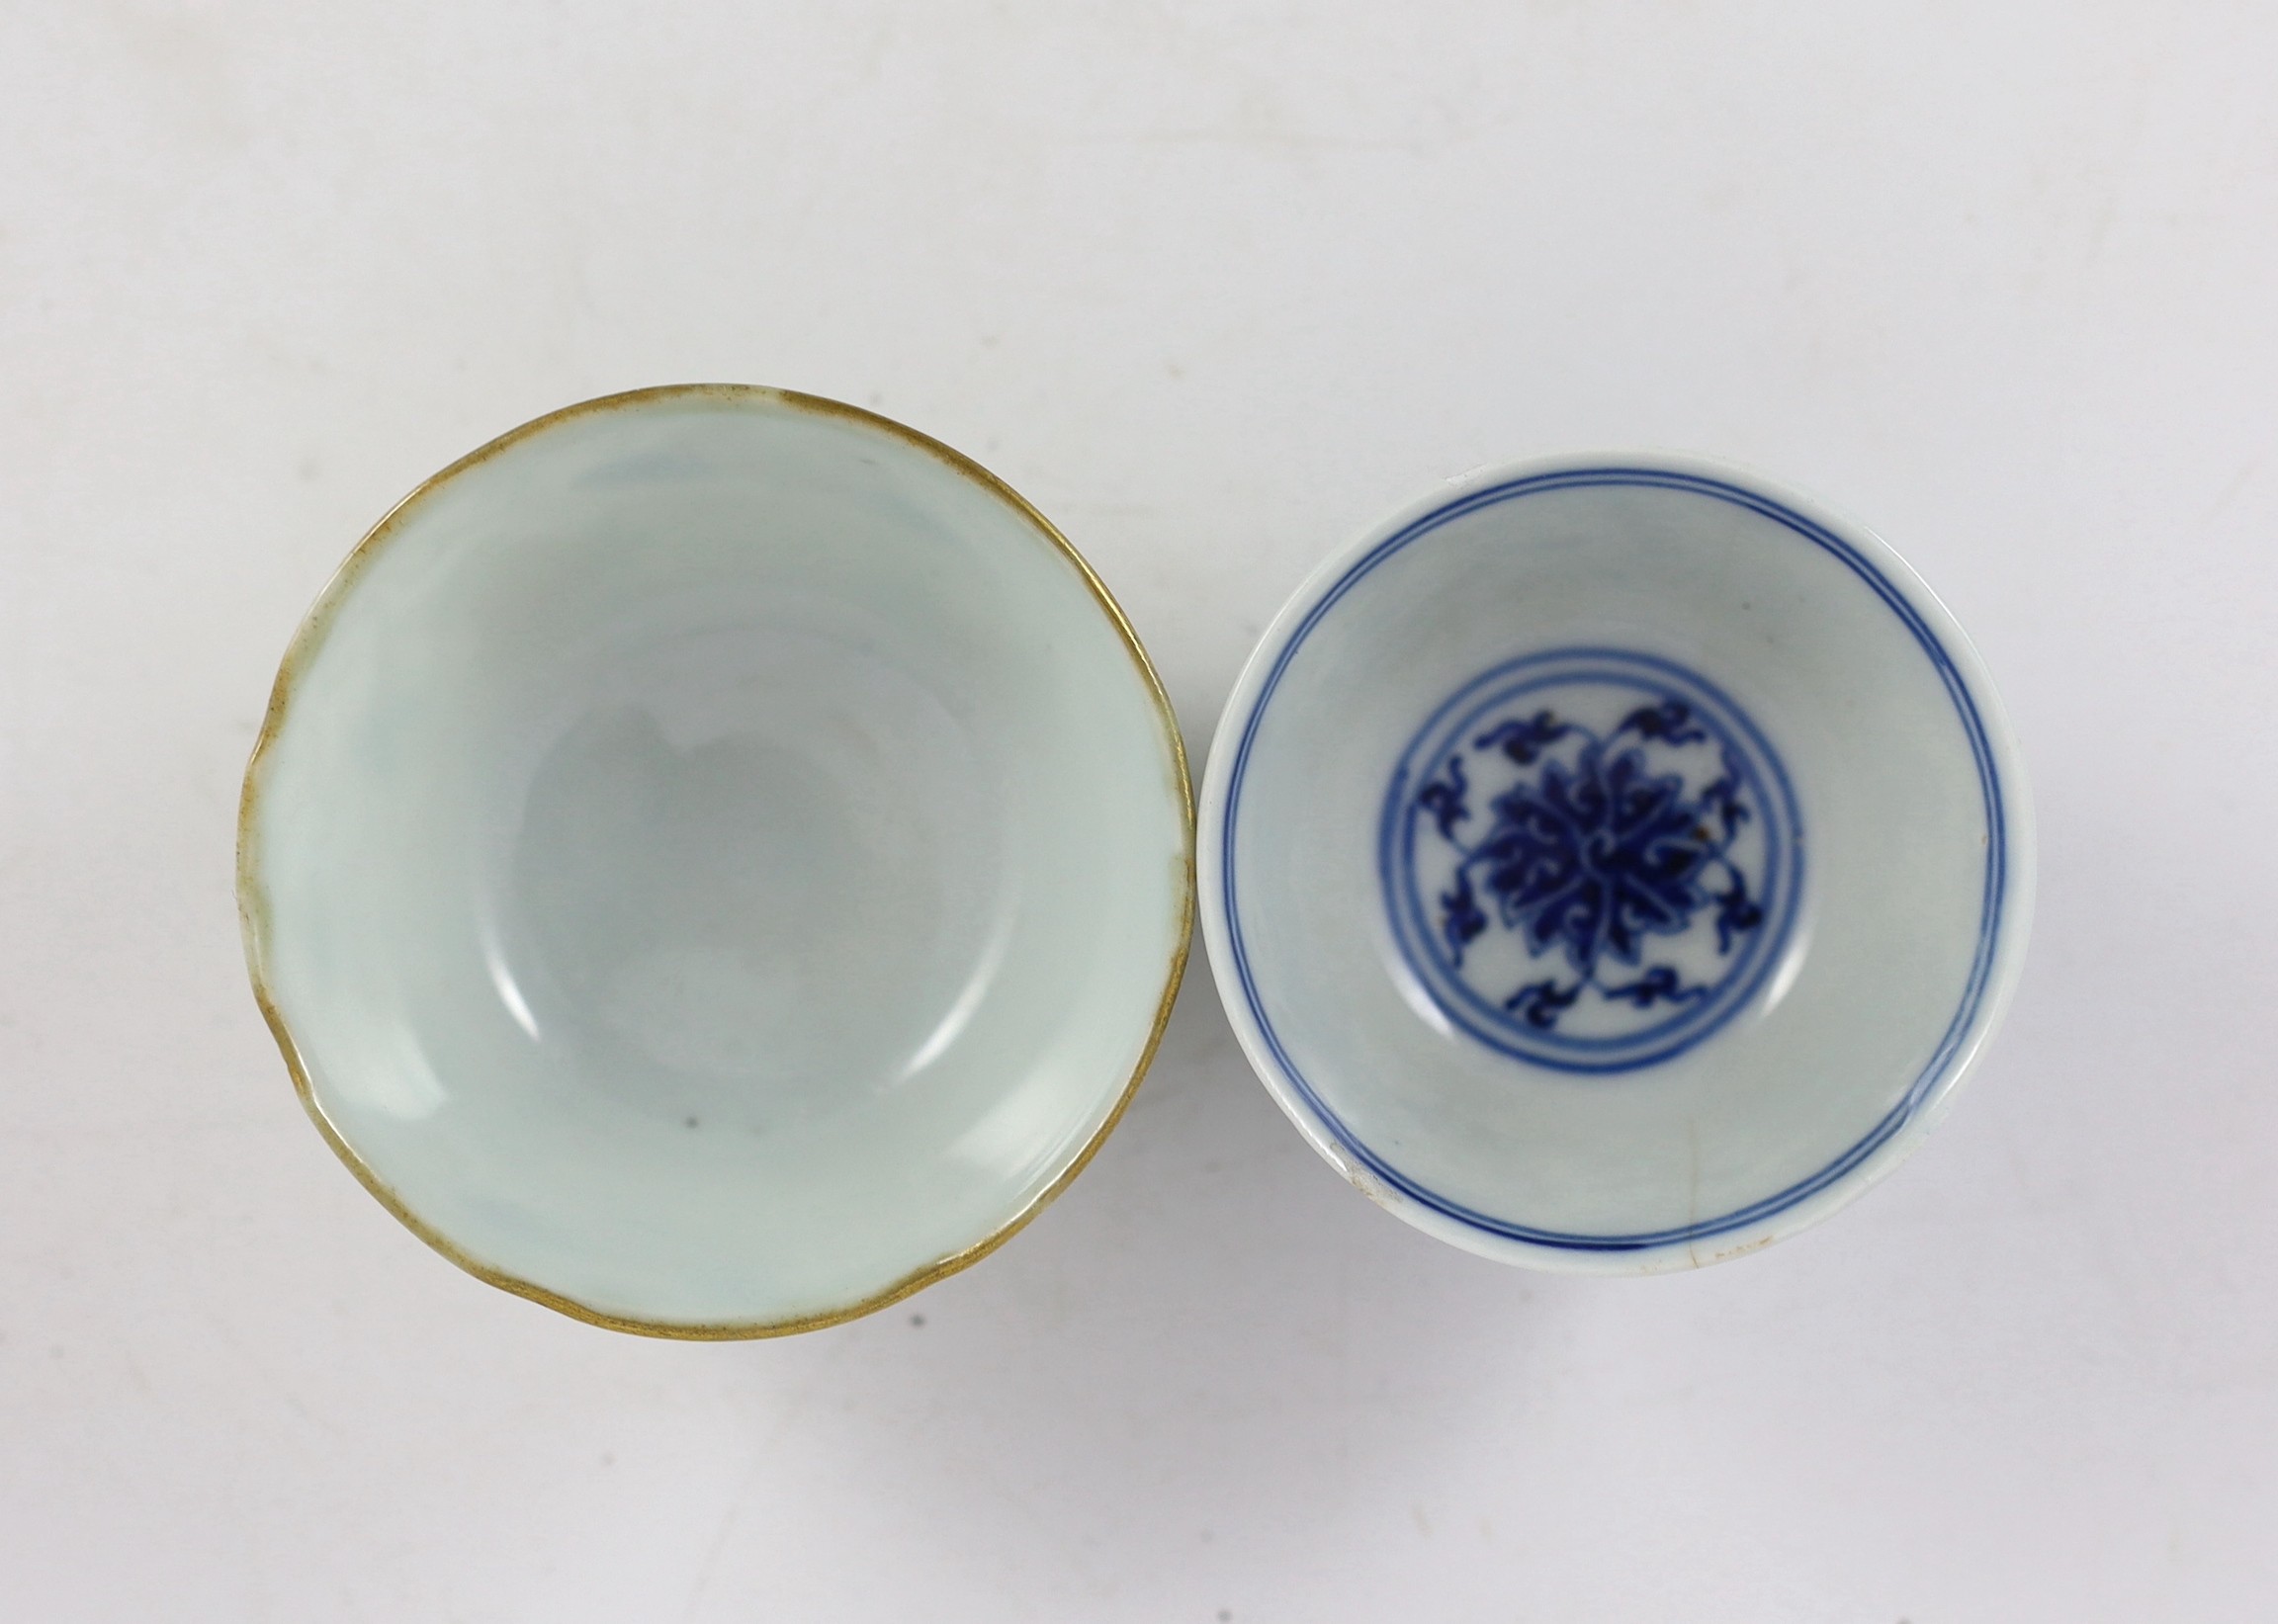 A Chinese enamelled porcelain ‘butterfly and melon’ cup, Republic period and a Chinese blue and white ‘lotus’ cup, late 19th century, (2)